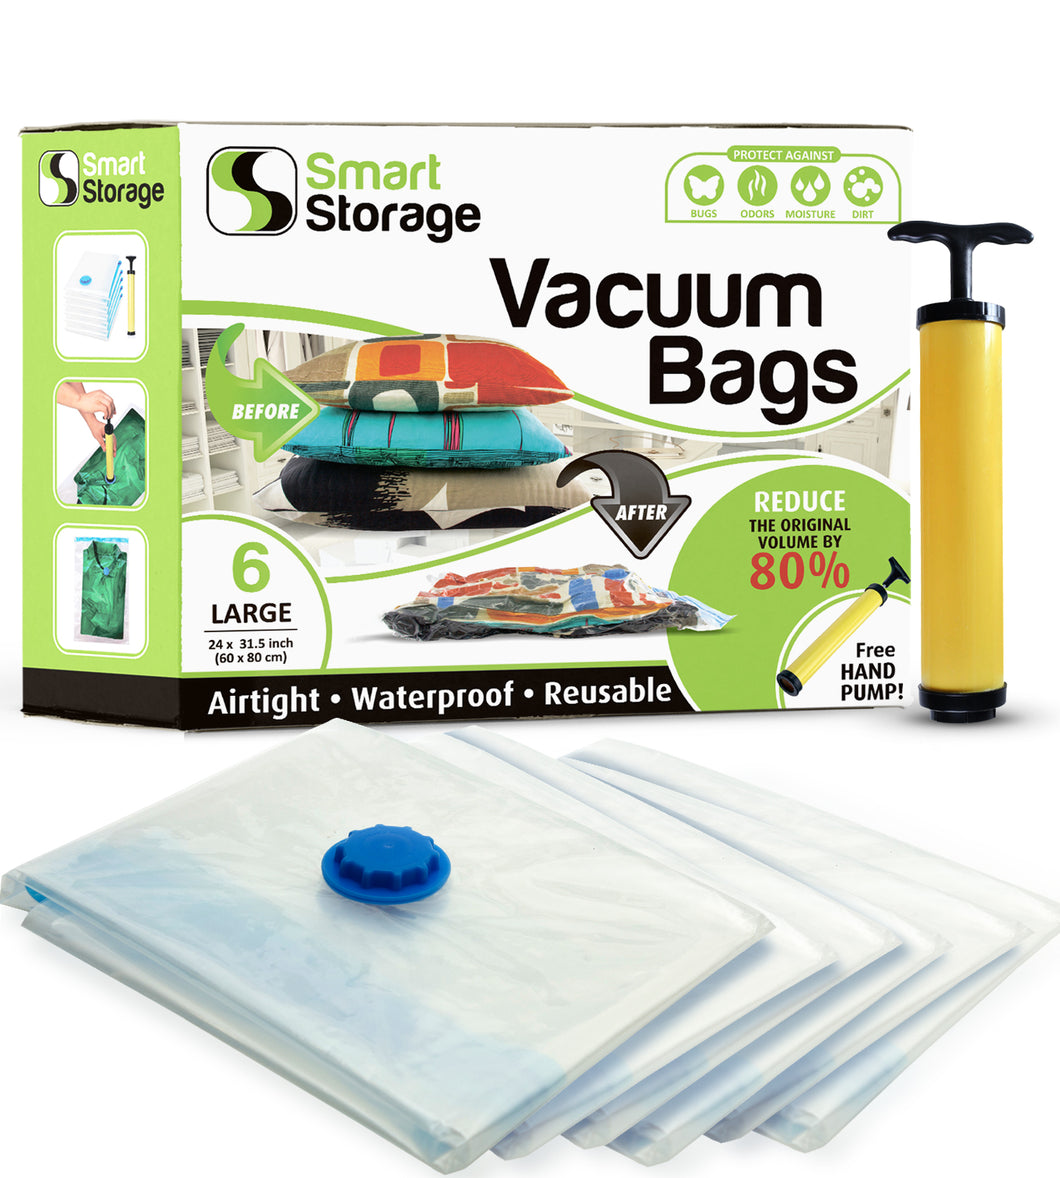 6 Pack Vacuum Storage Bags for Clothes, Clothes Vacuum Bags Save 80% Space,  Work with Vacuum Cleaner, Travel Hand Pump Included (6-Medium)